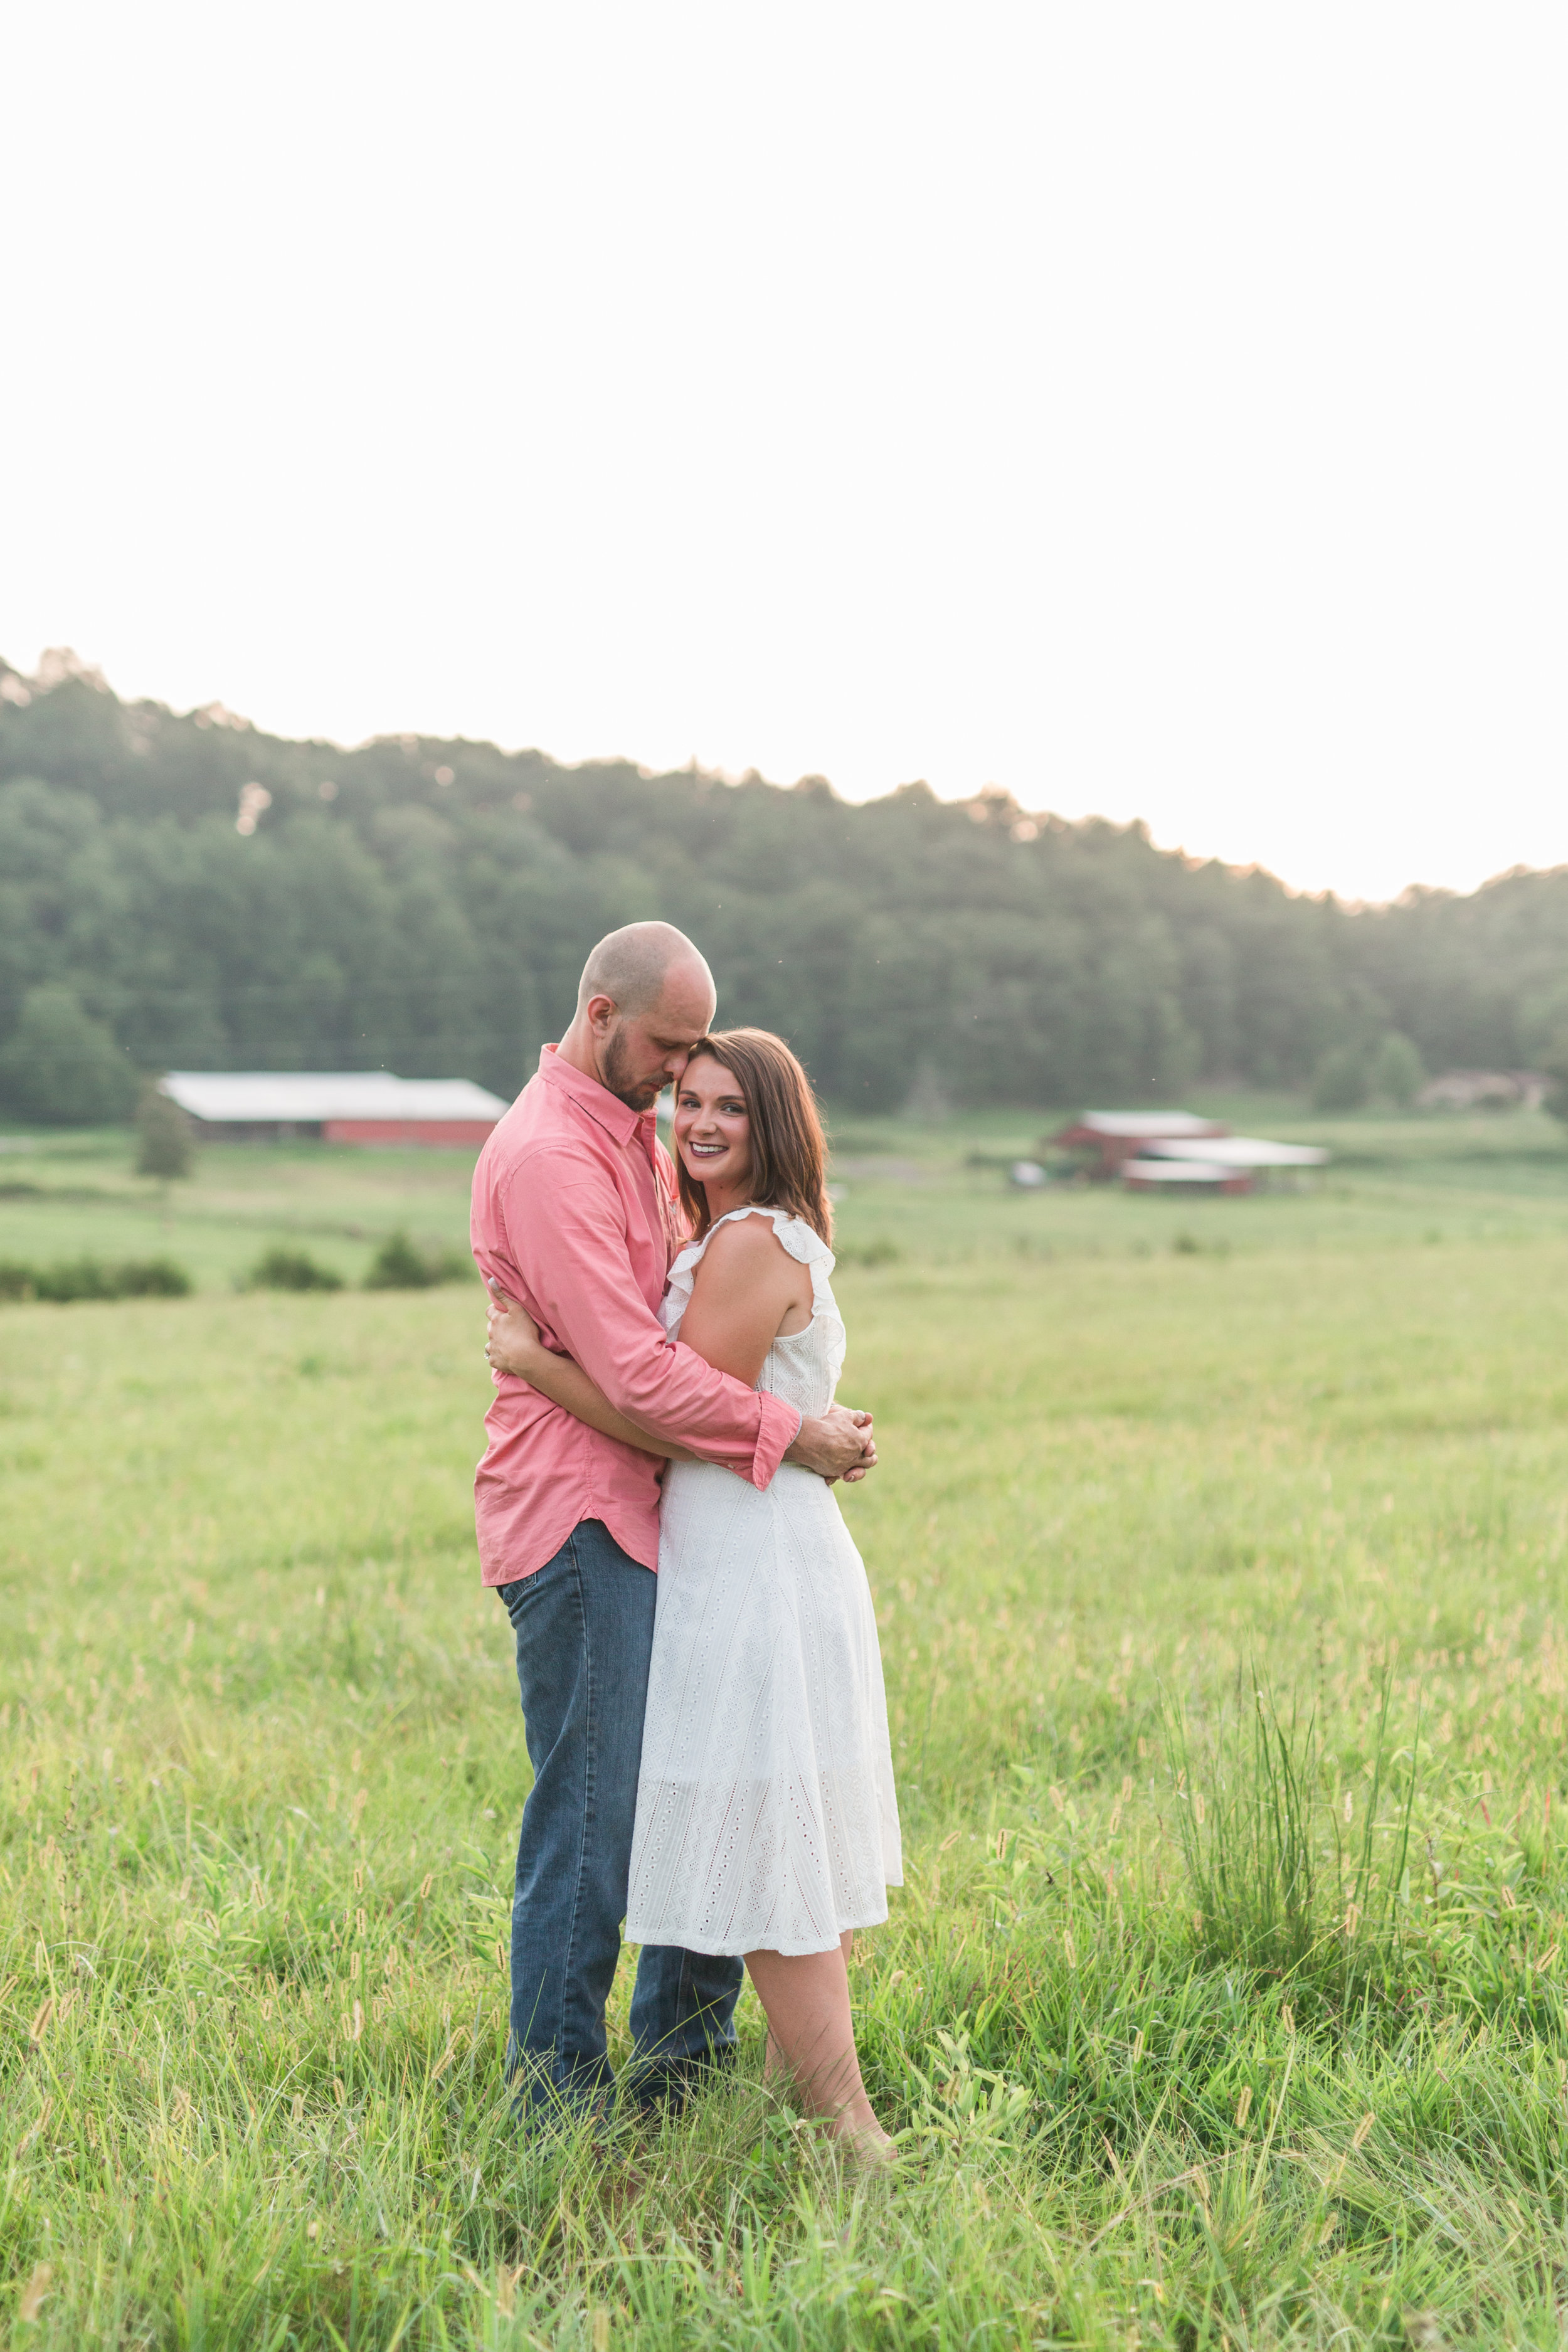 Eagle Rock Engagement Session || Summer Engagement Session in Central Virginia || Virginia Wedding Photographer || Ashley Eiban Photography